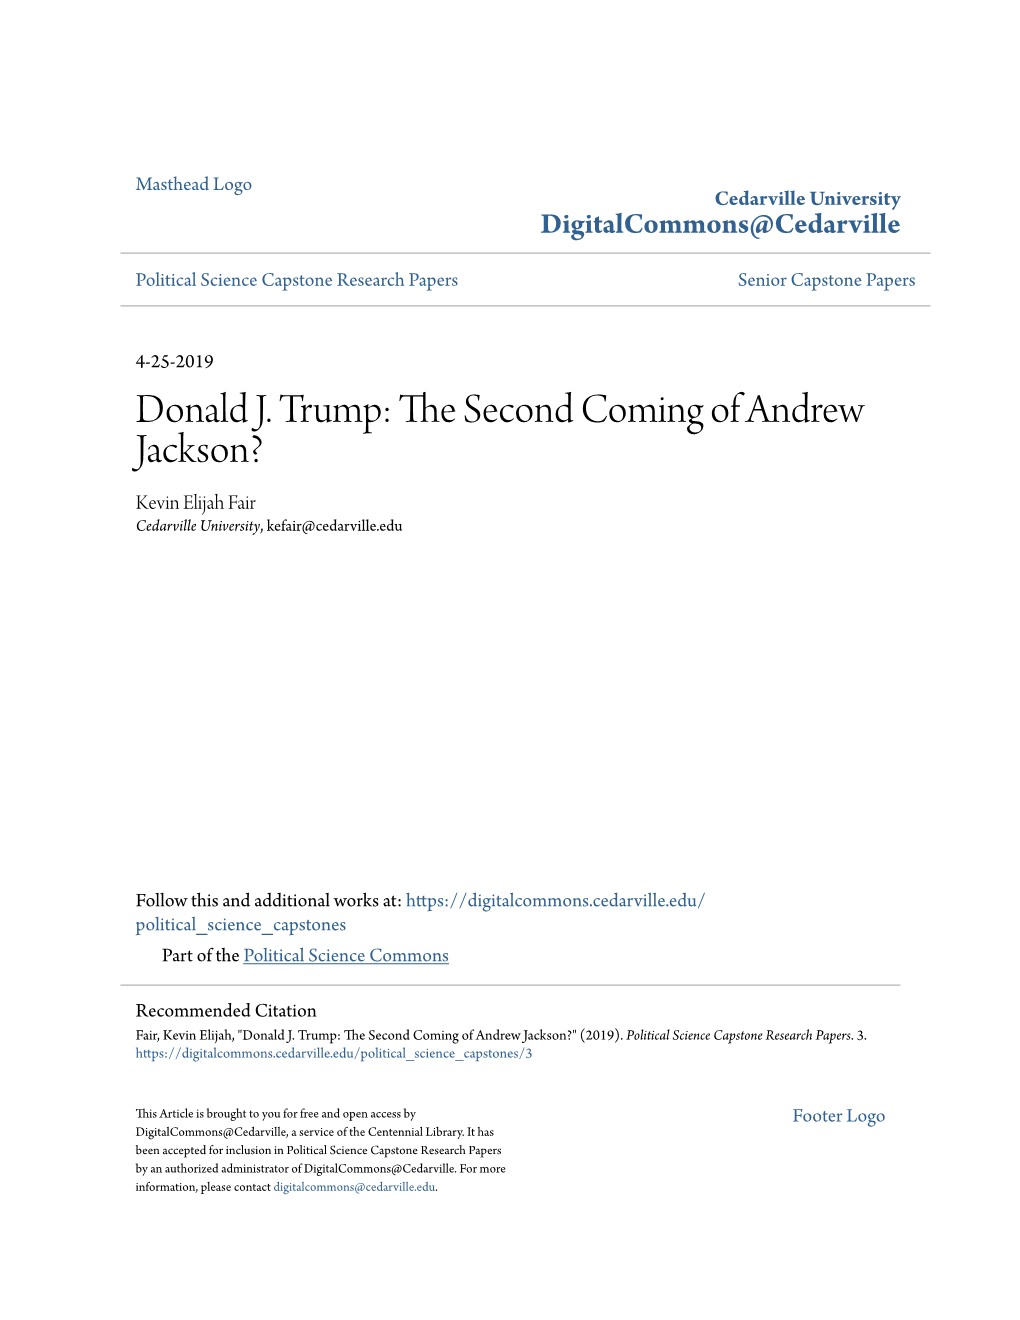 Donald J. Trump: the Second Coming of Andrew Jackson?